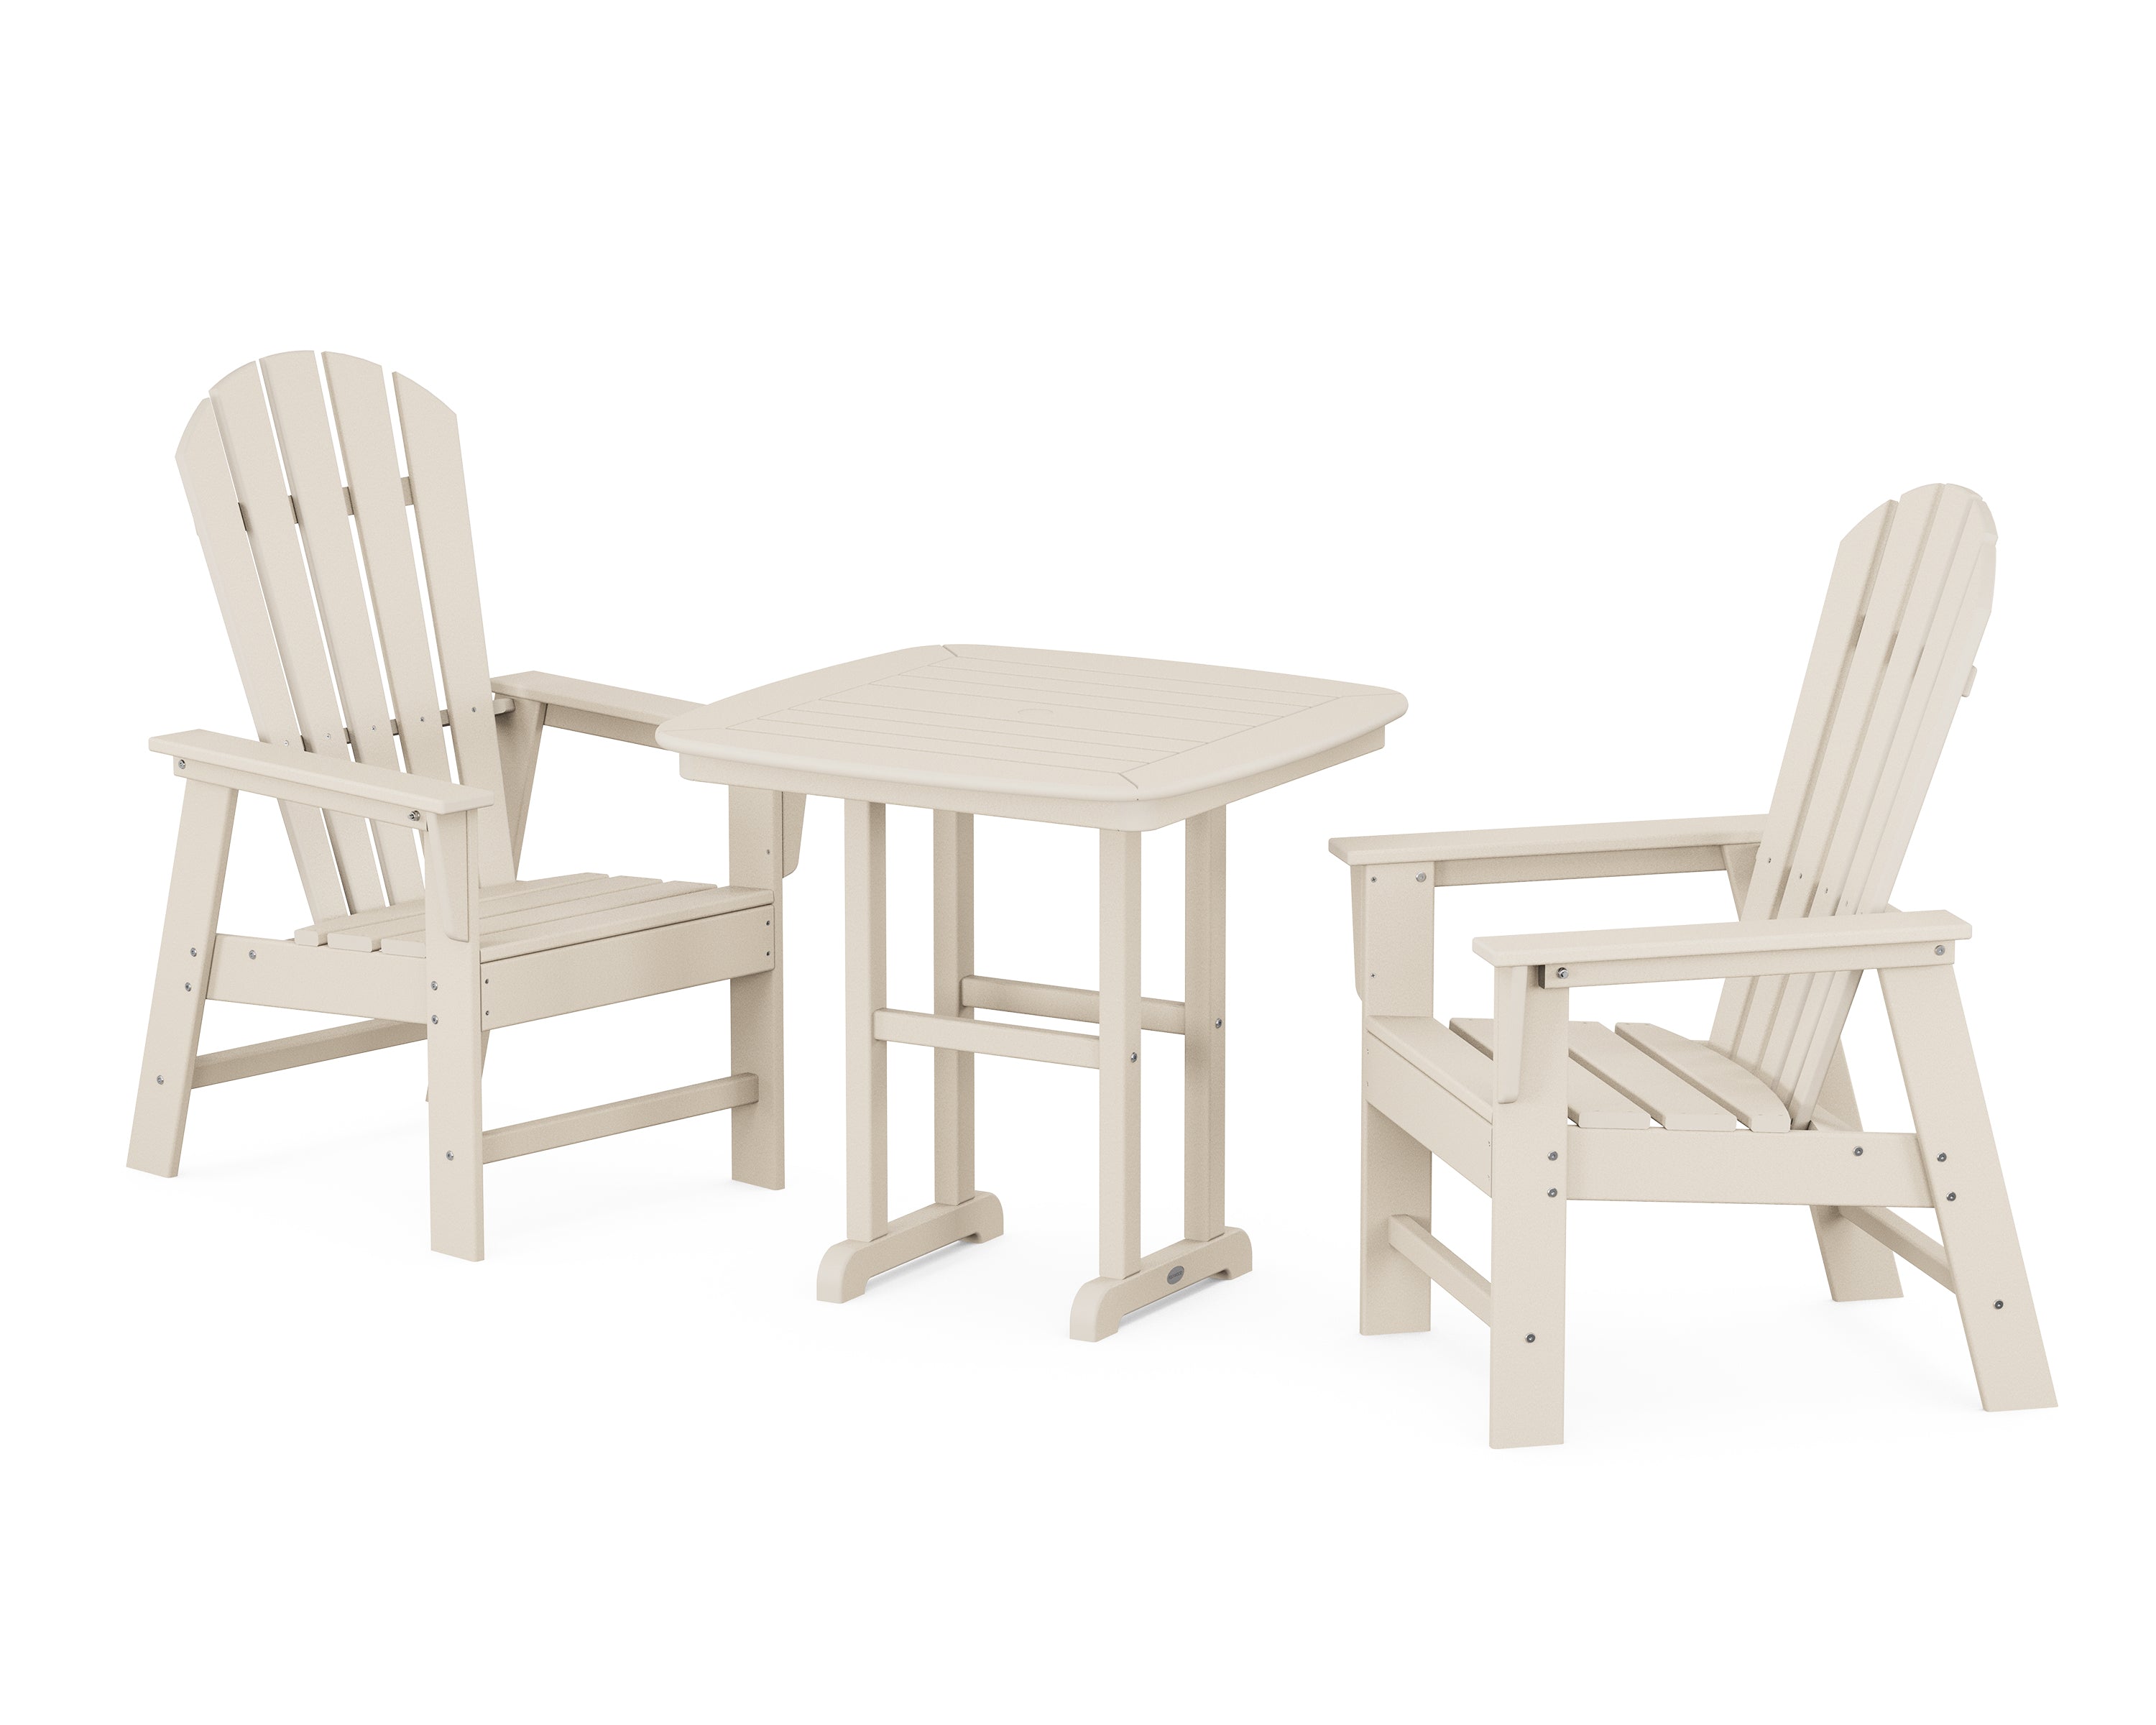 POLYWOOD® South Beach 3-Piece Dining Set in Sand